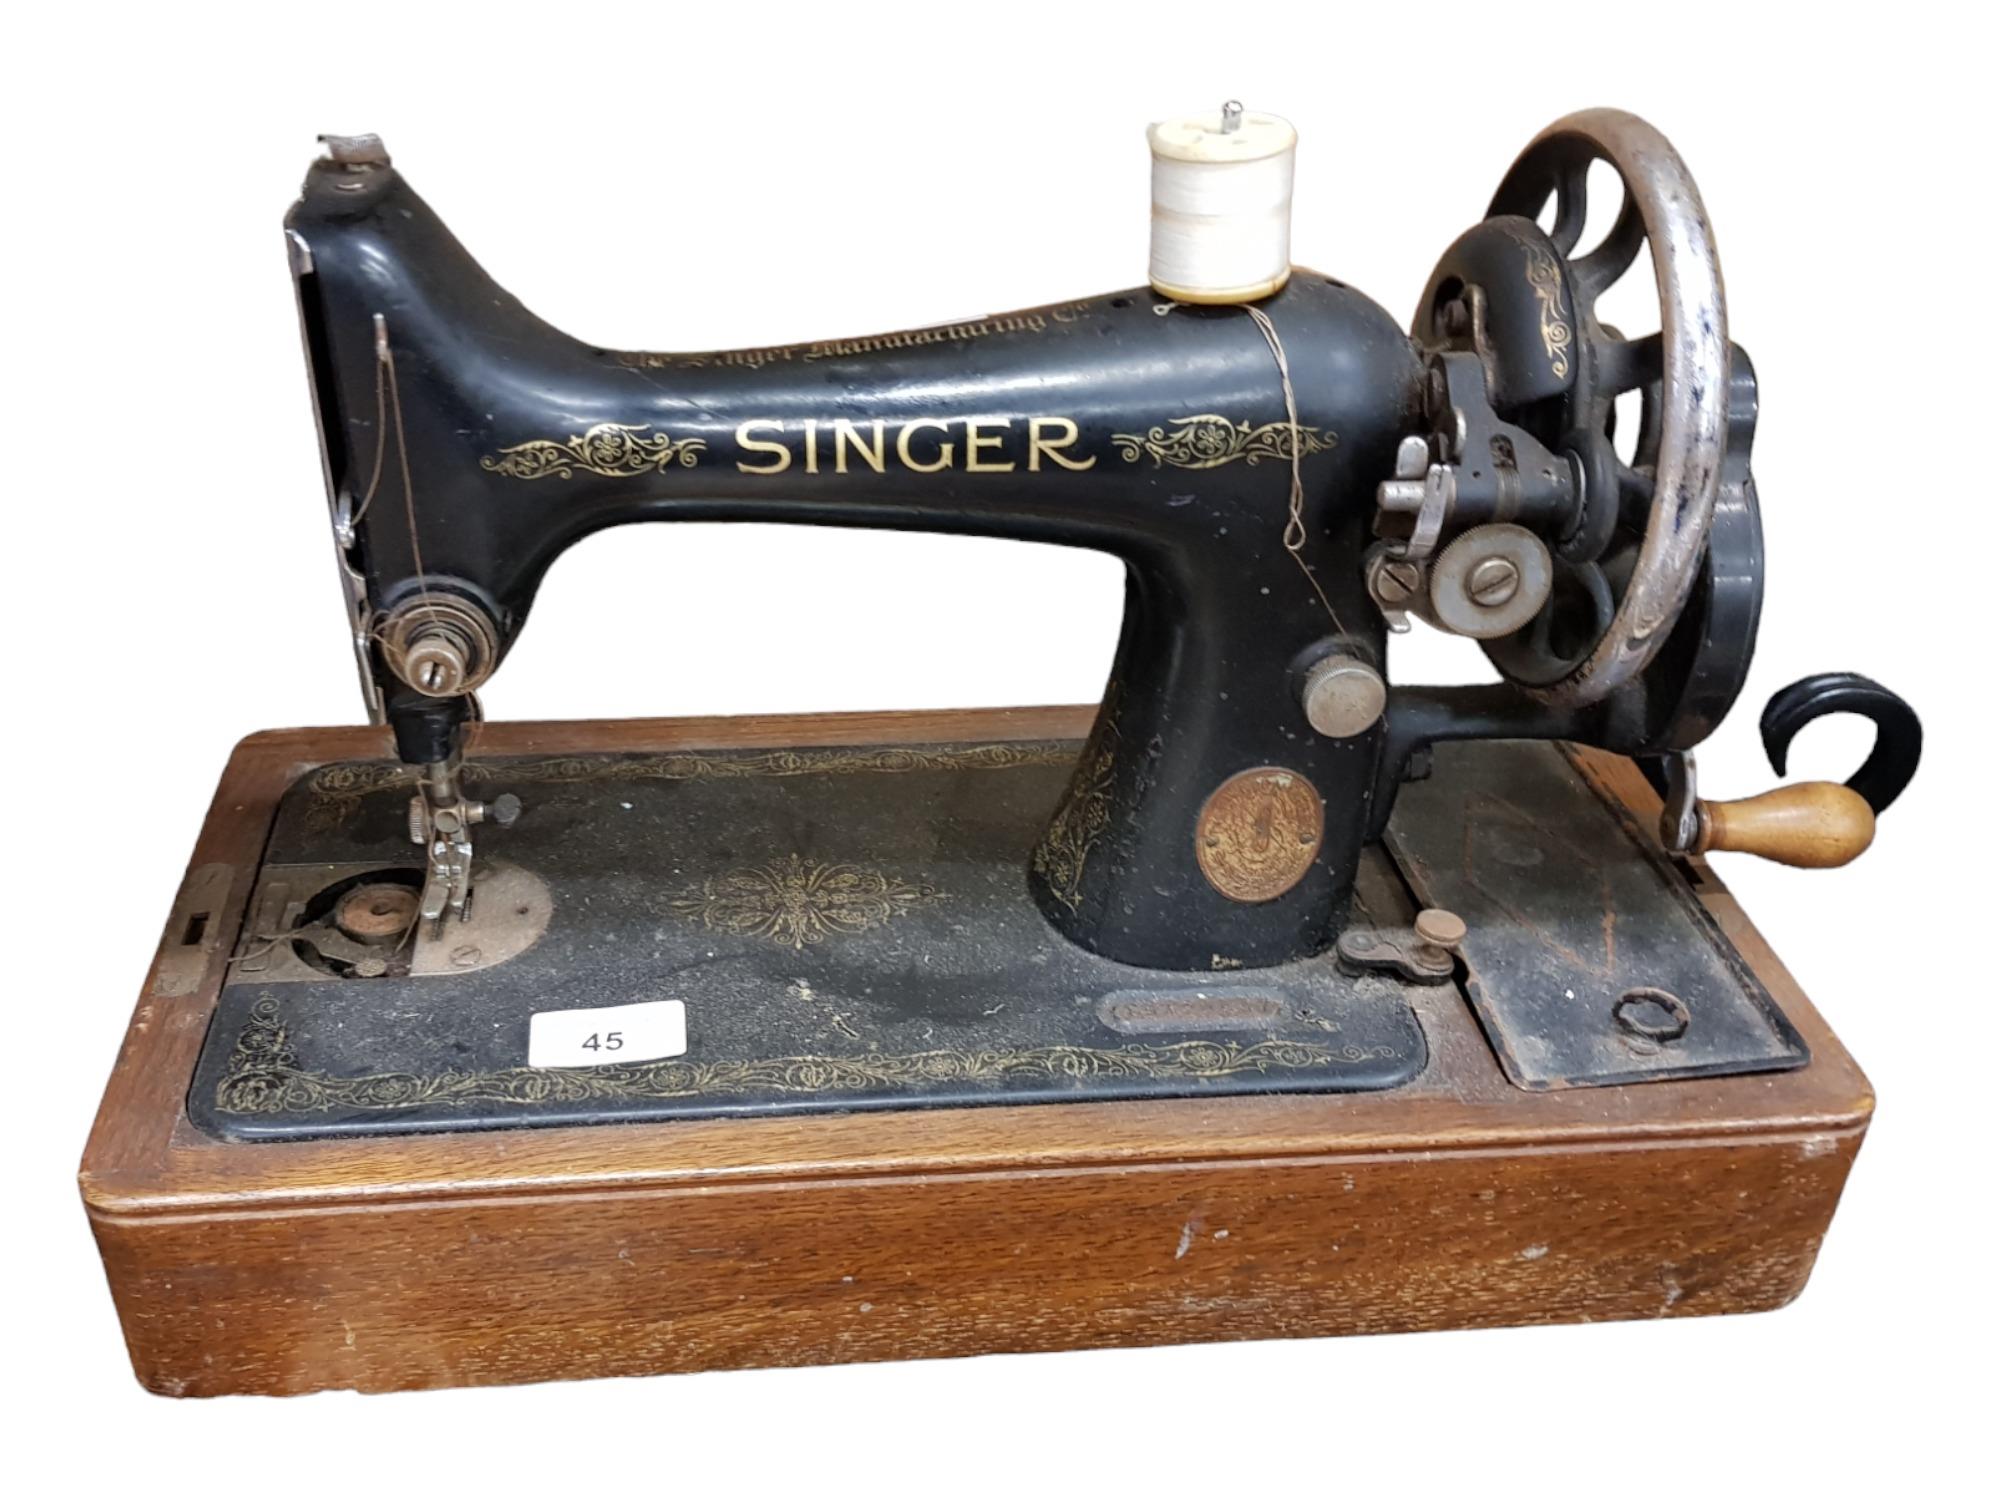 OLD SINGER SEWING MACHINE FOR DISPLAY